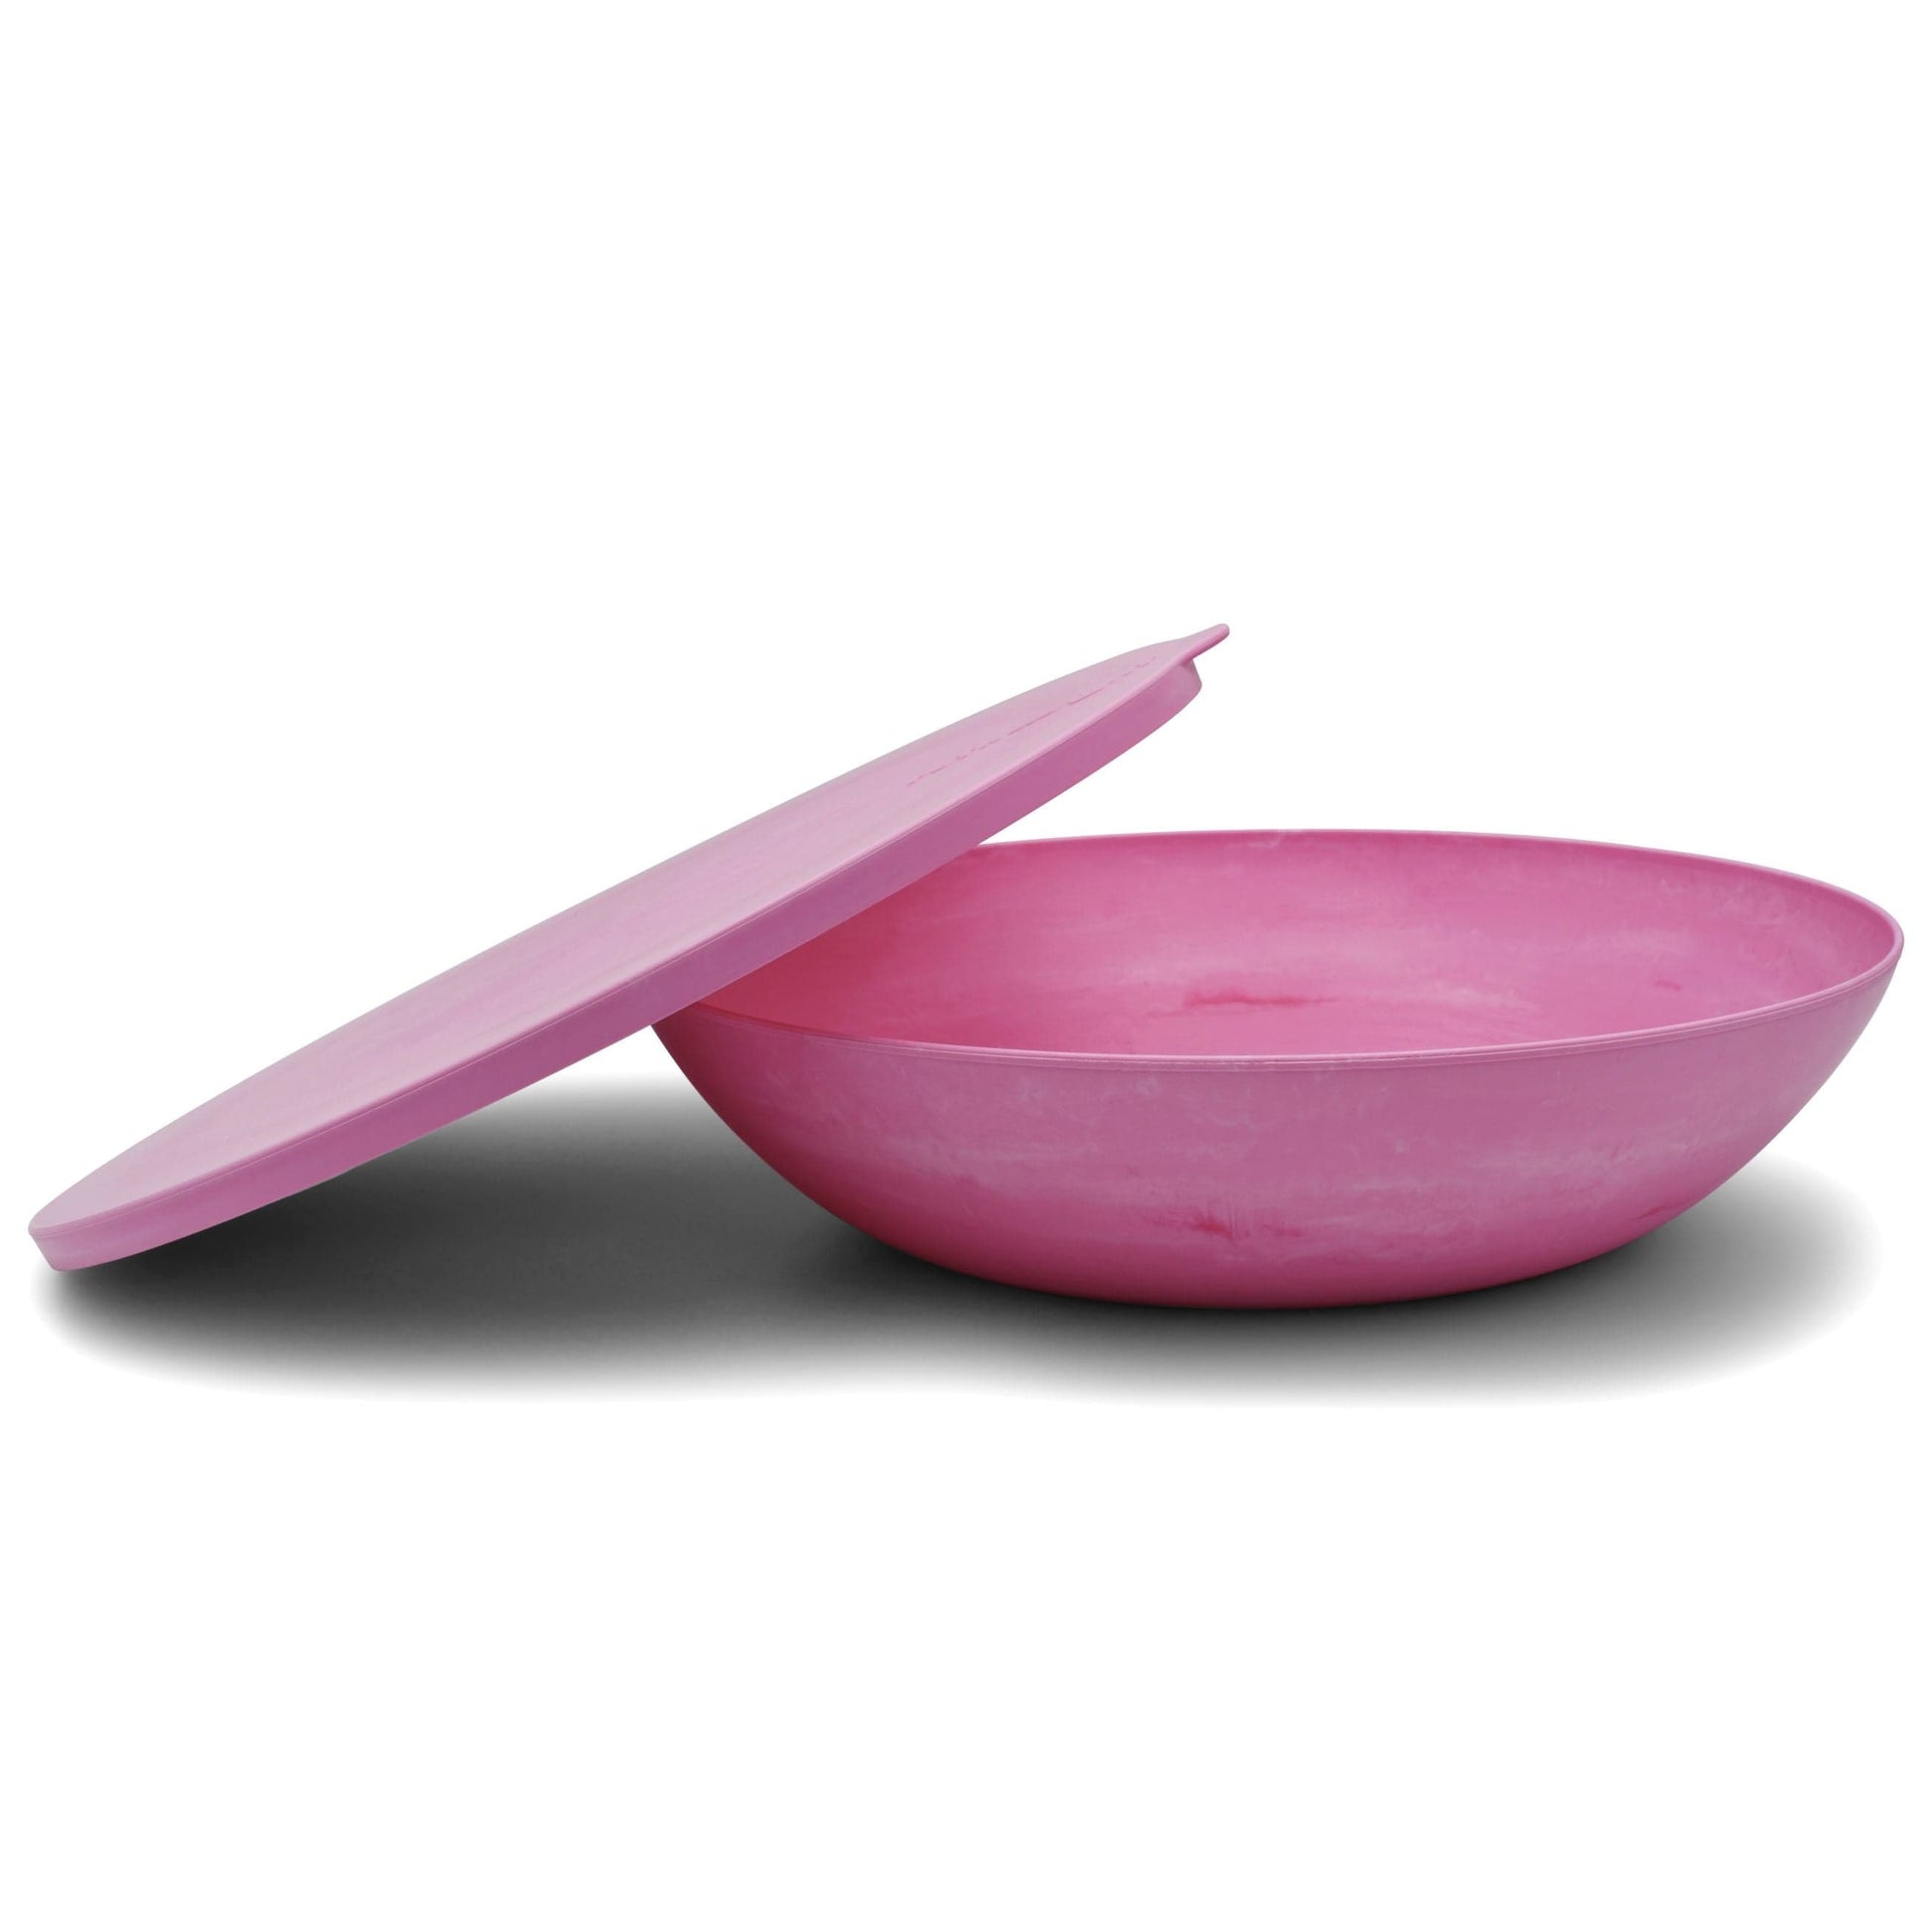 Serving bowl with a lid — the round Pink